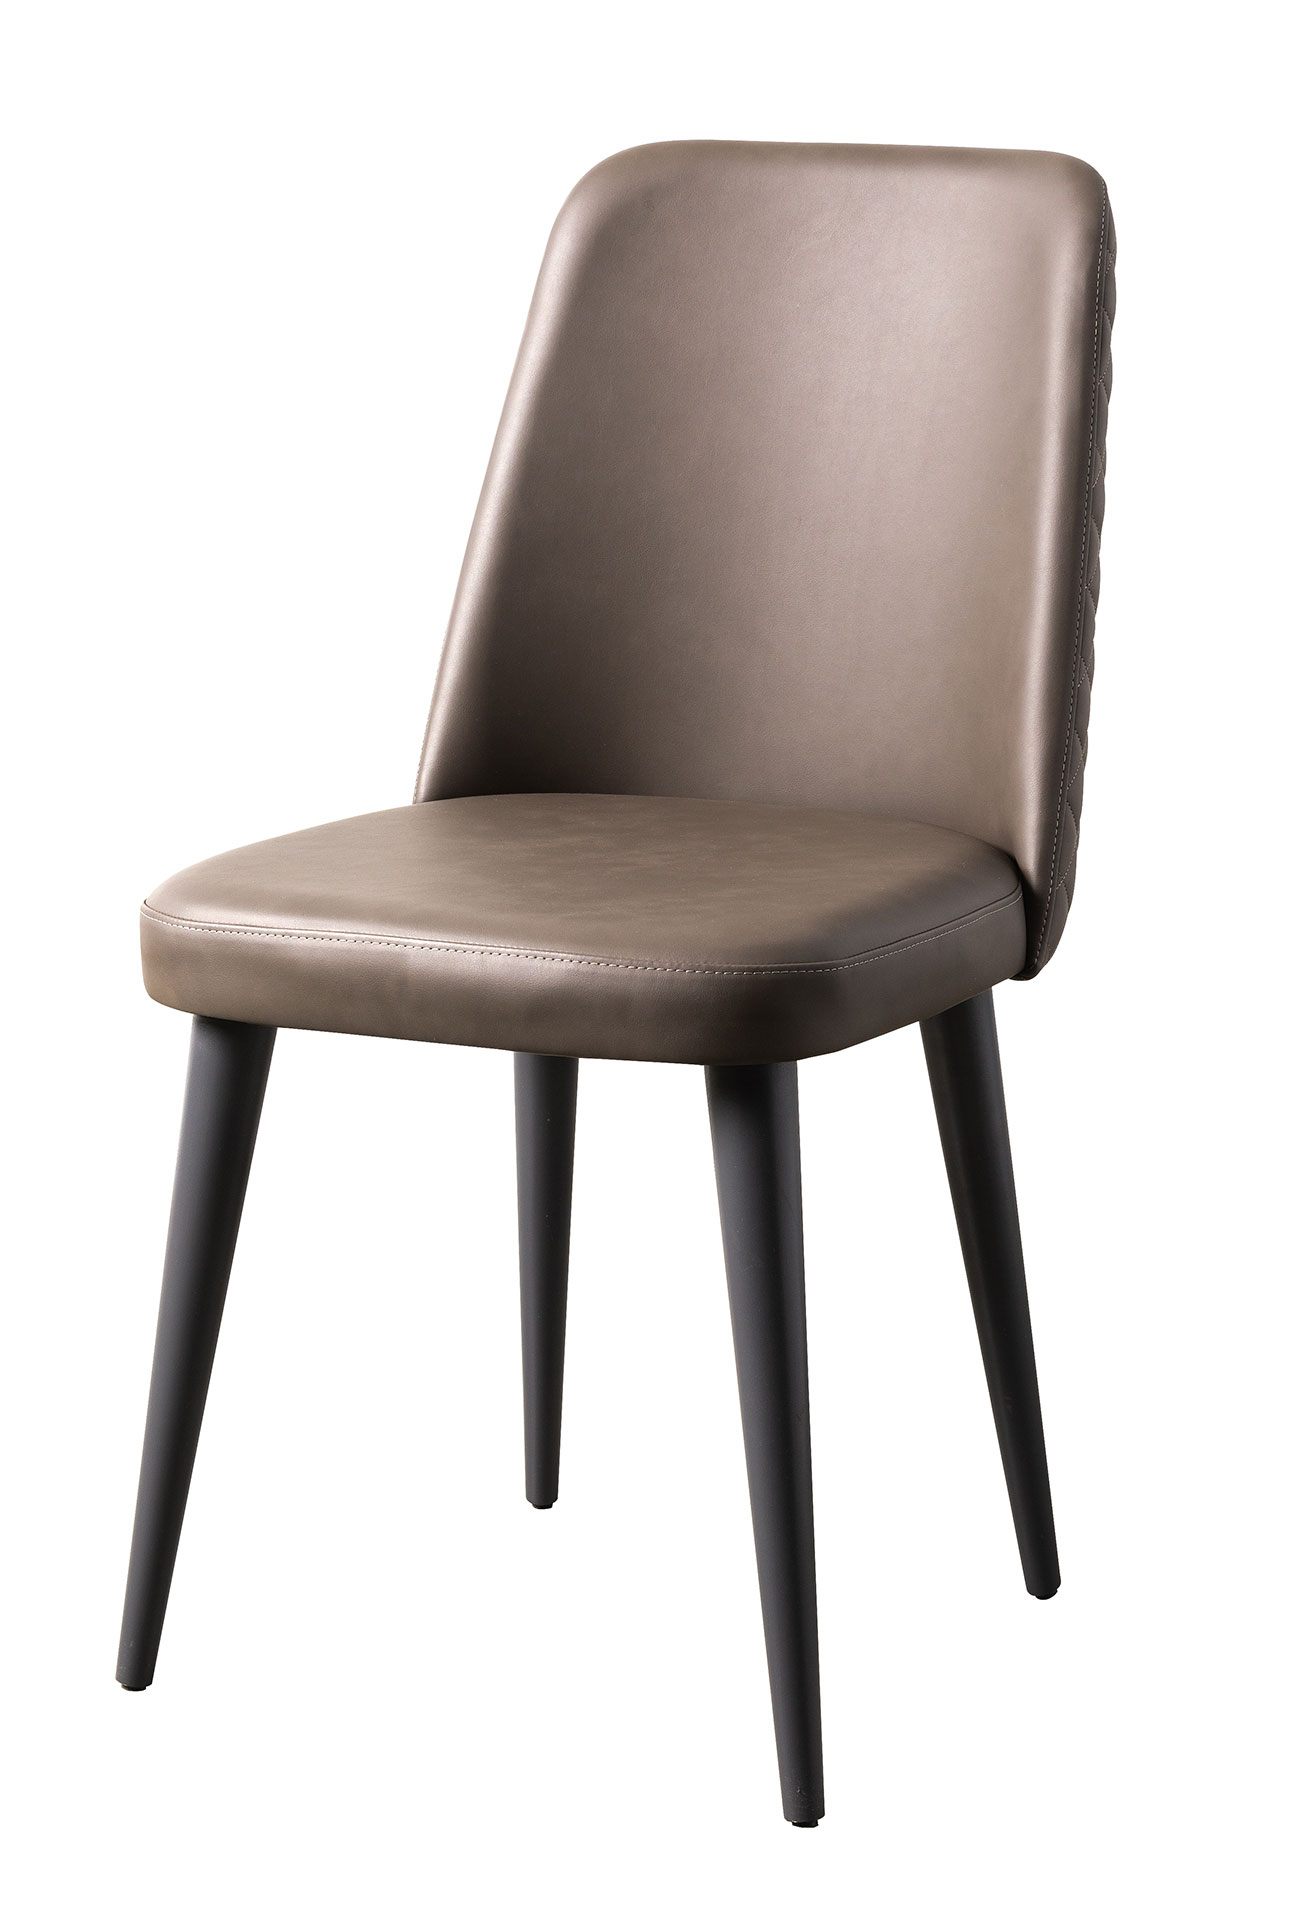 Brands Status Modern Collections, Italy Nora Chair